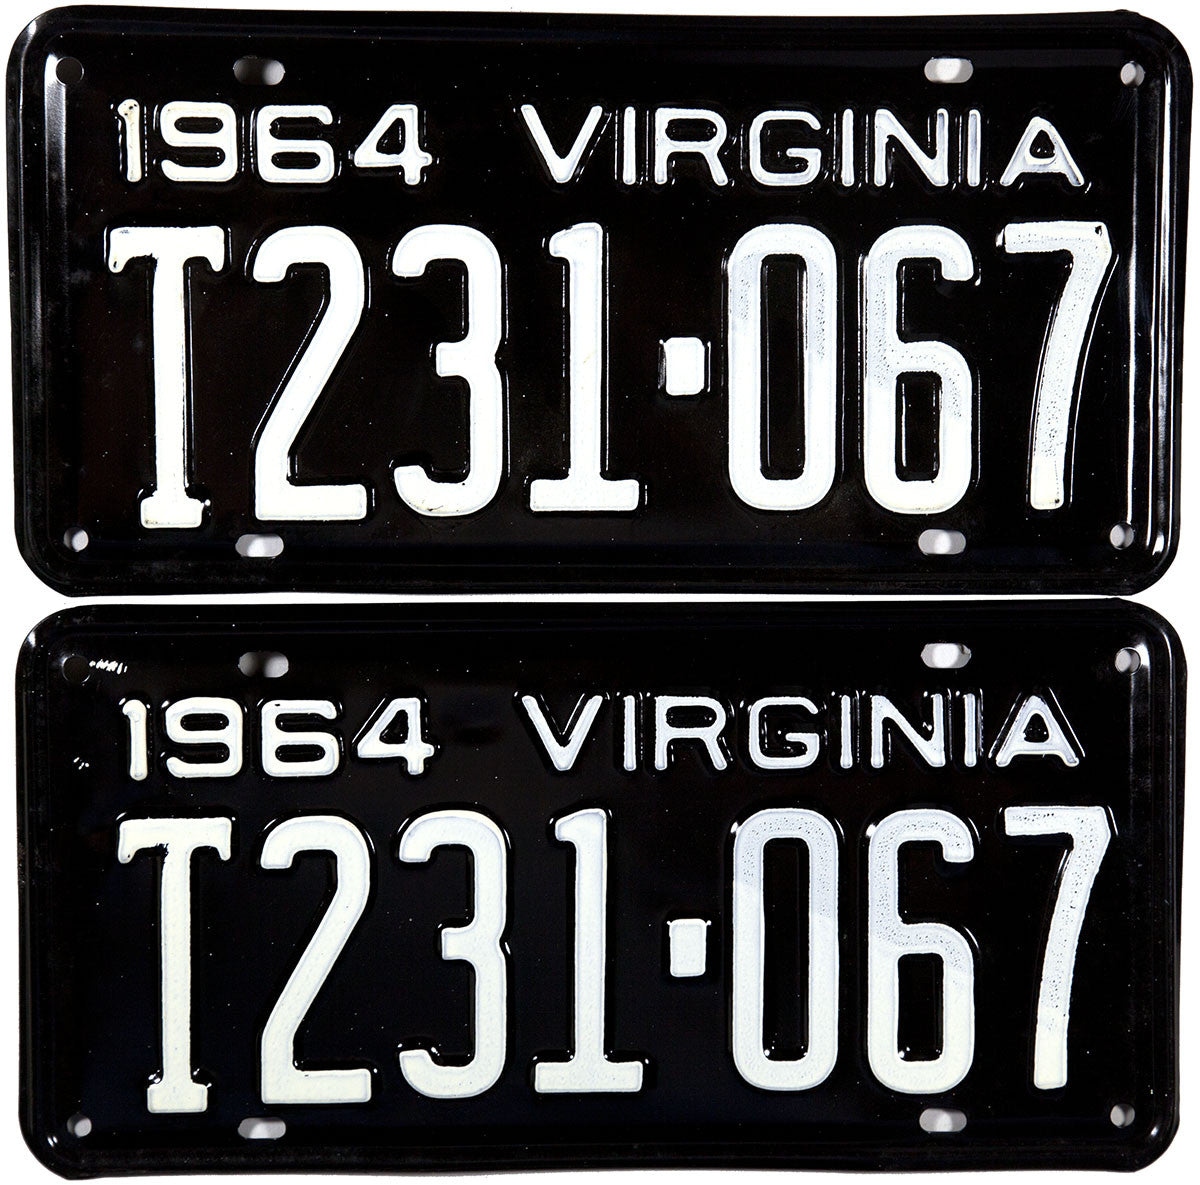 1964 Virginia Truck License Plates in Excellent condition